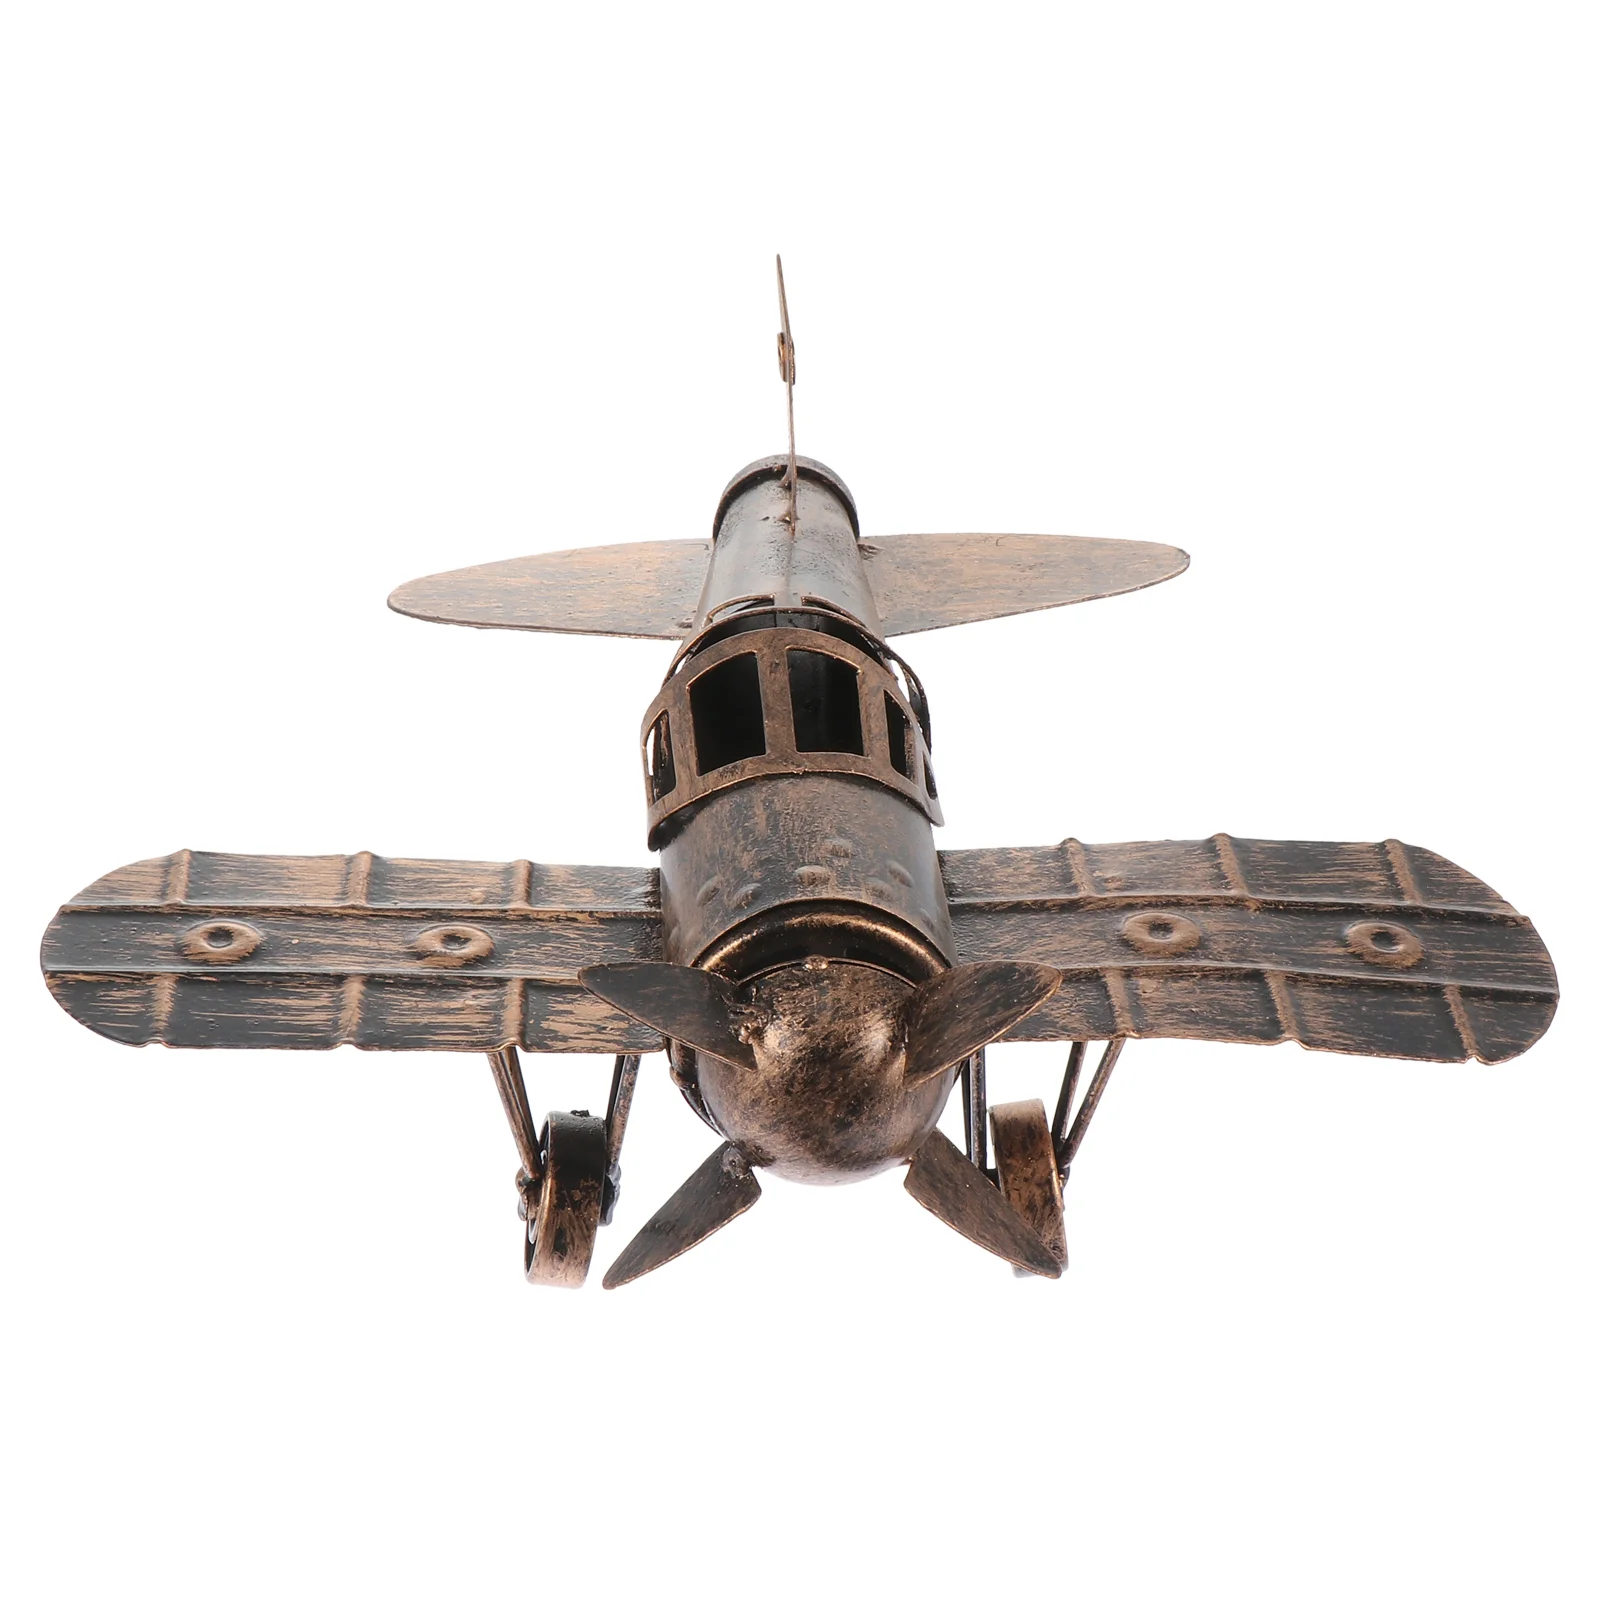 

Wrought Iron Airplane Model Toy Small Aircraft Vintage Decor Home Decorate Retro Tabletop Ornament Adornment Child Decorations